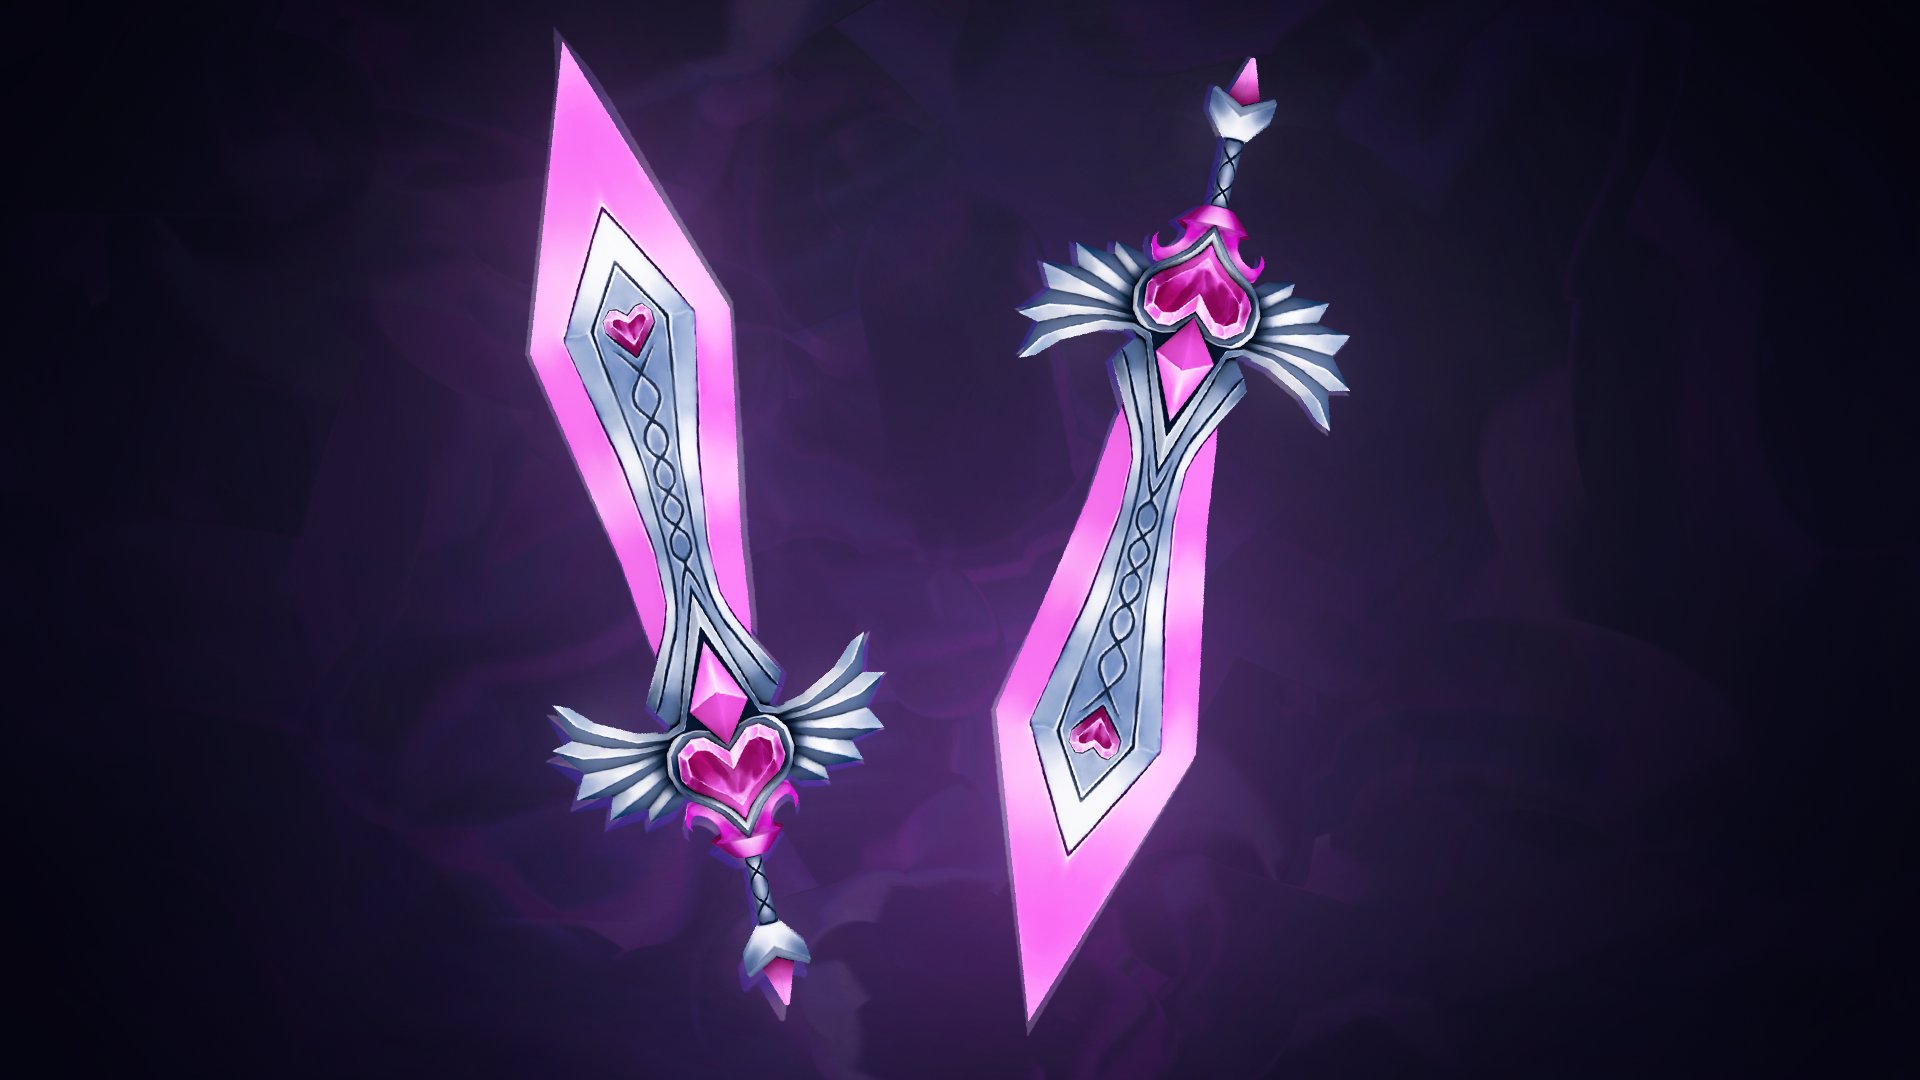 IDHAU on X: Check out the Heartblade I made for Murder Mystery 2